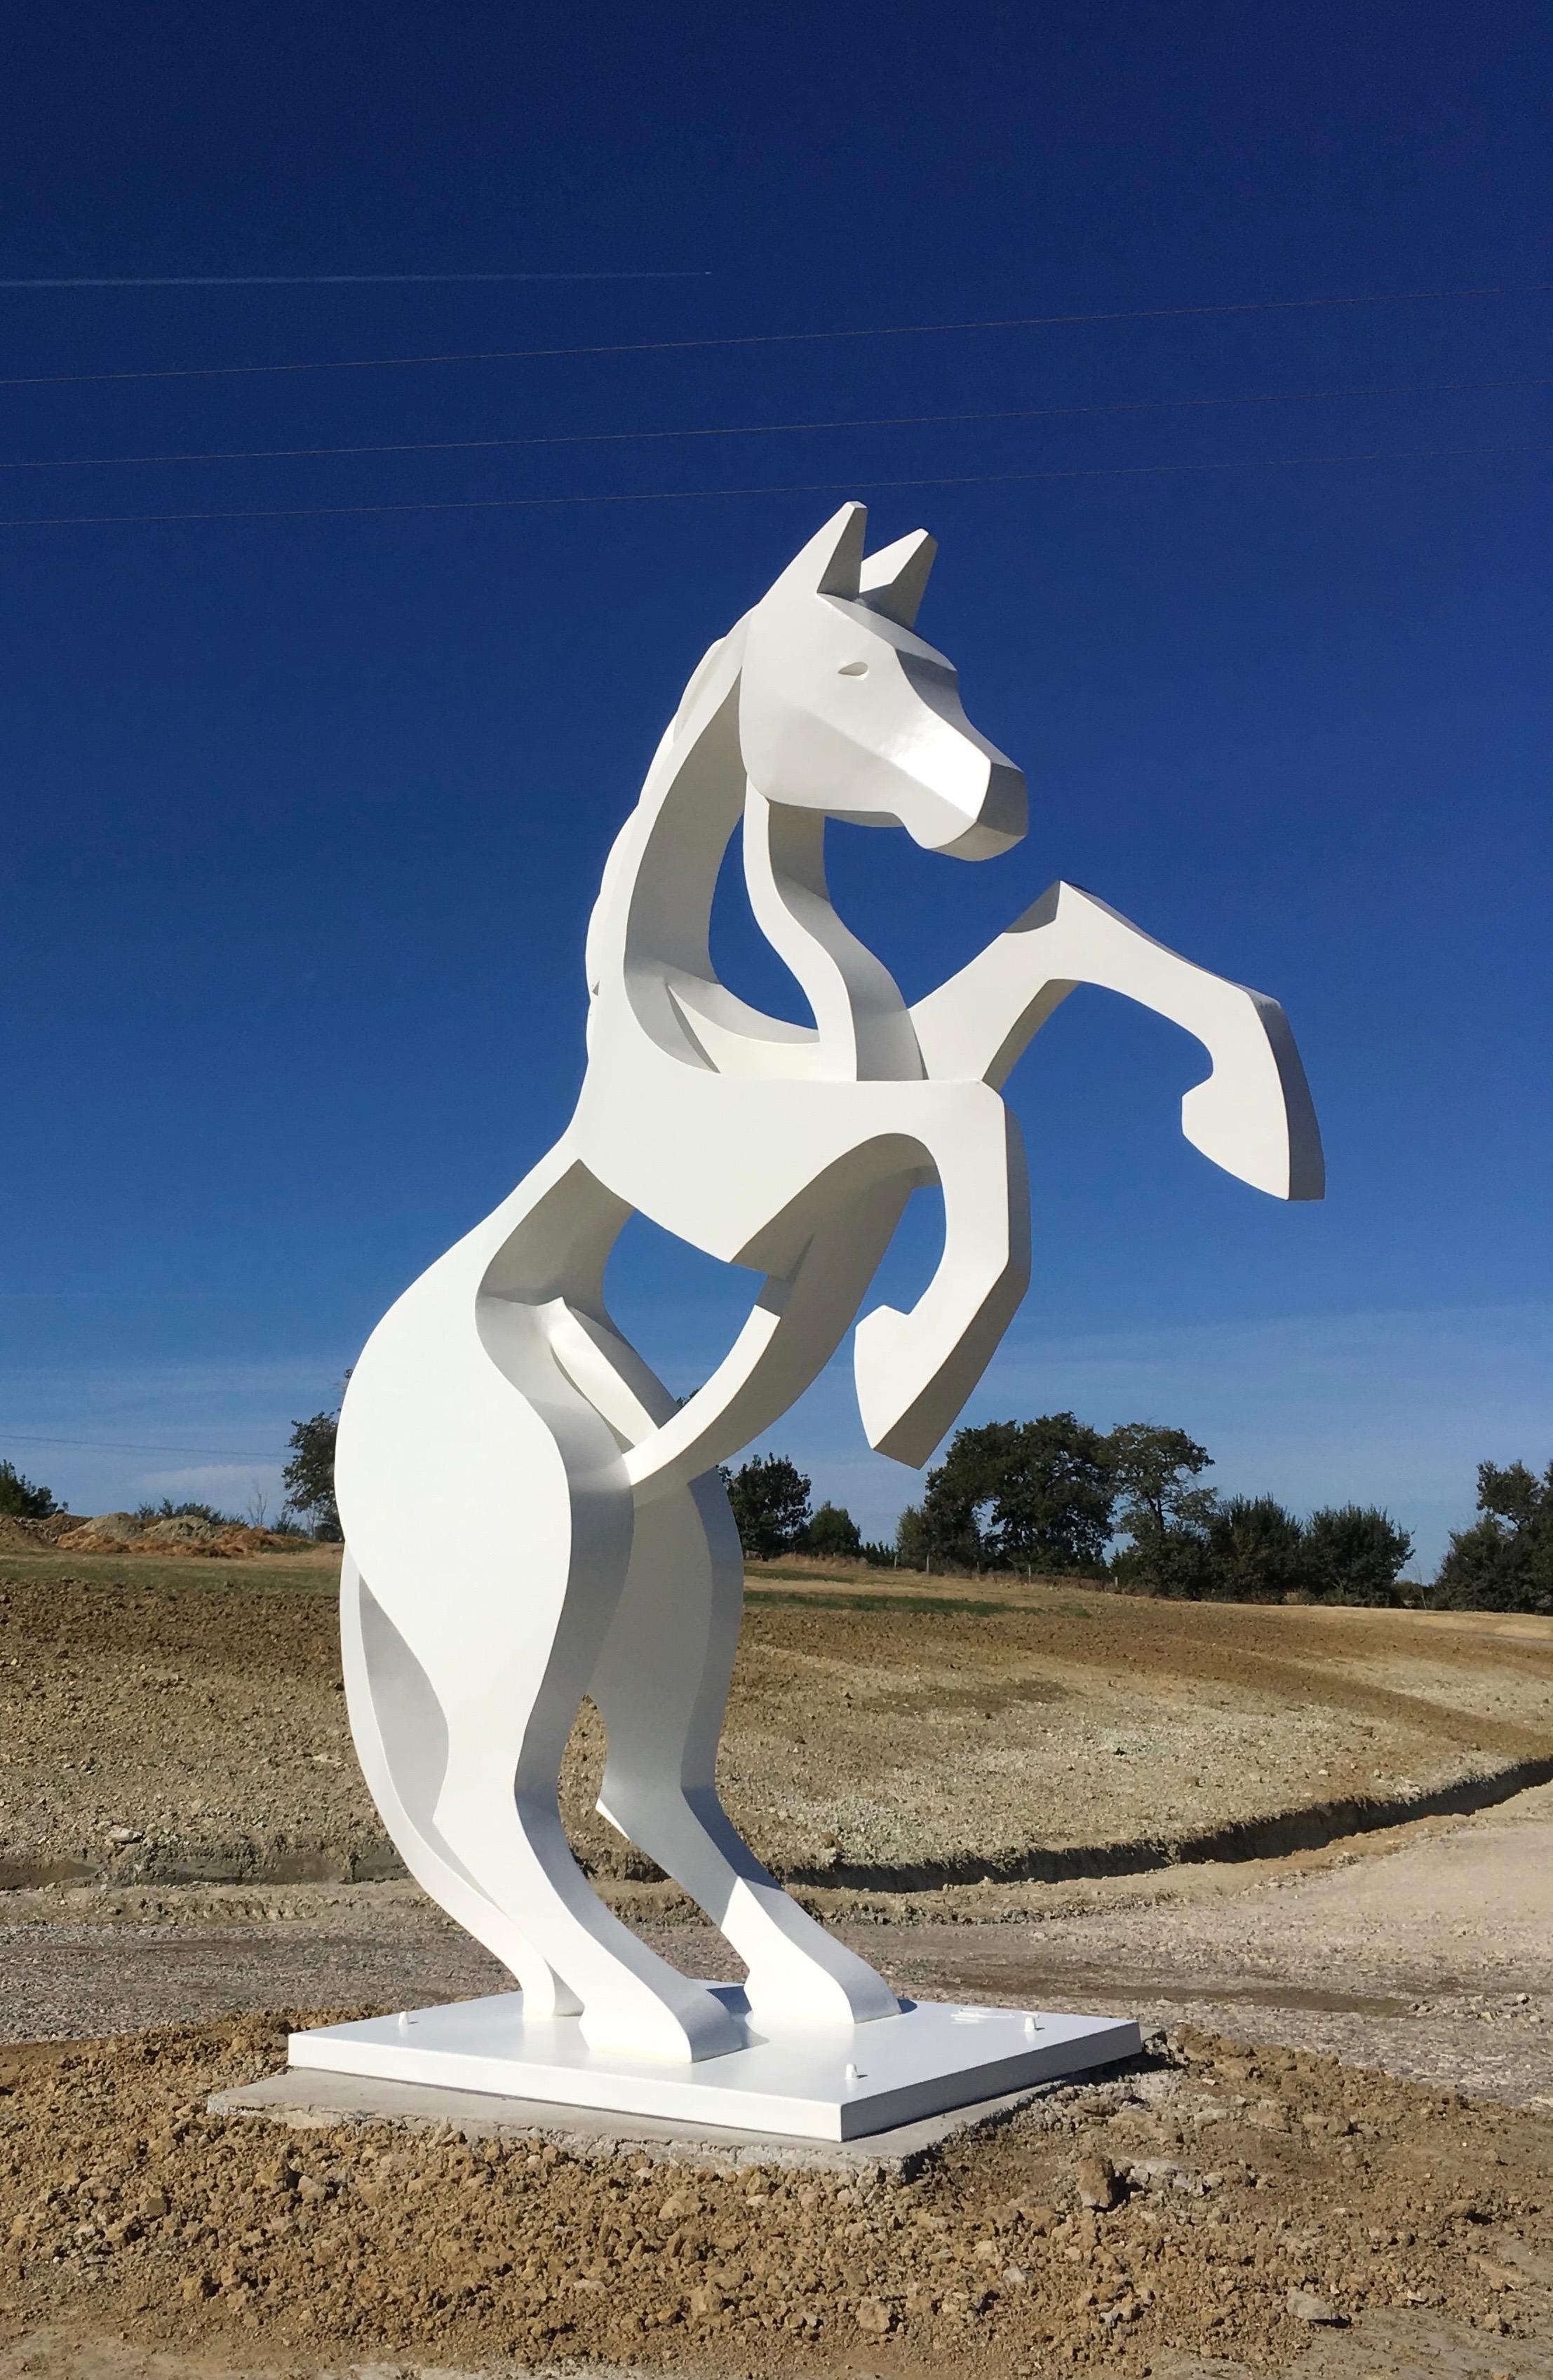 Large Rearing Horse by Eric Valat - Animal sculpture, Outdoor sculpture